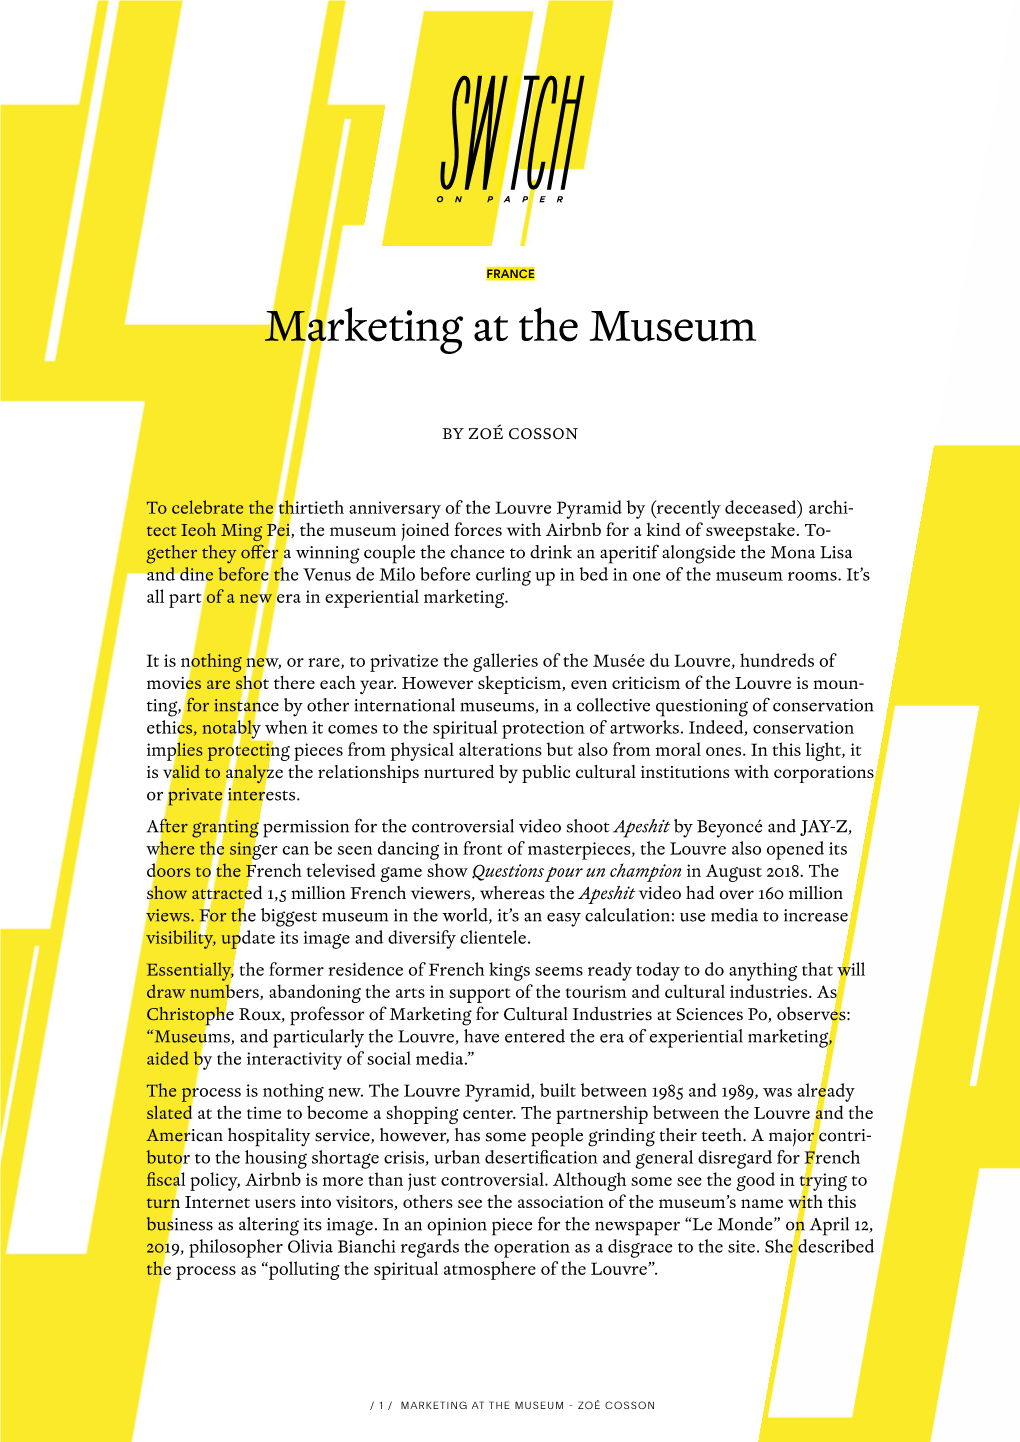 Marketing at the Museum